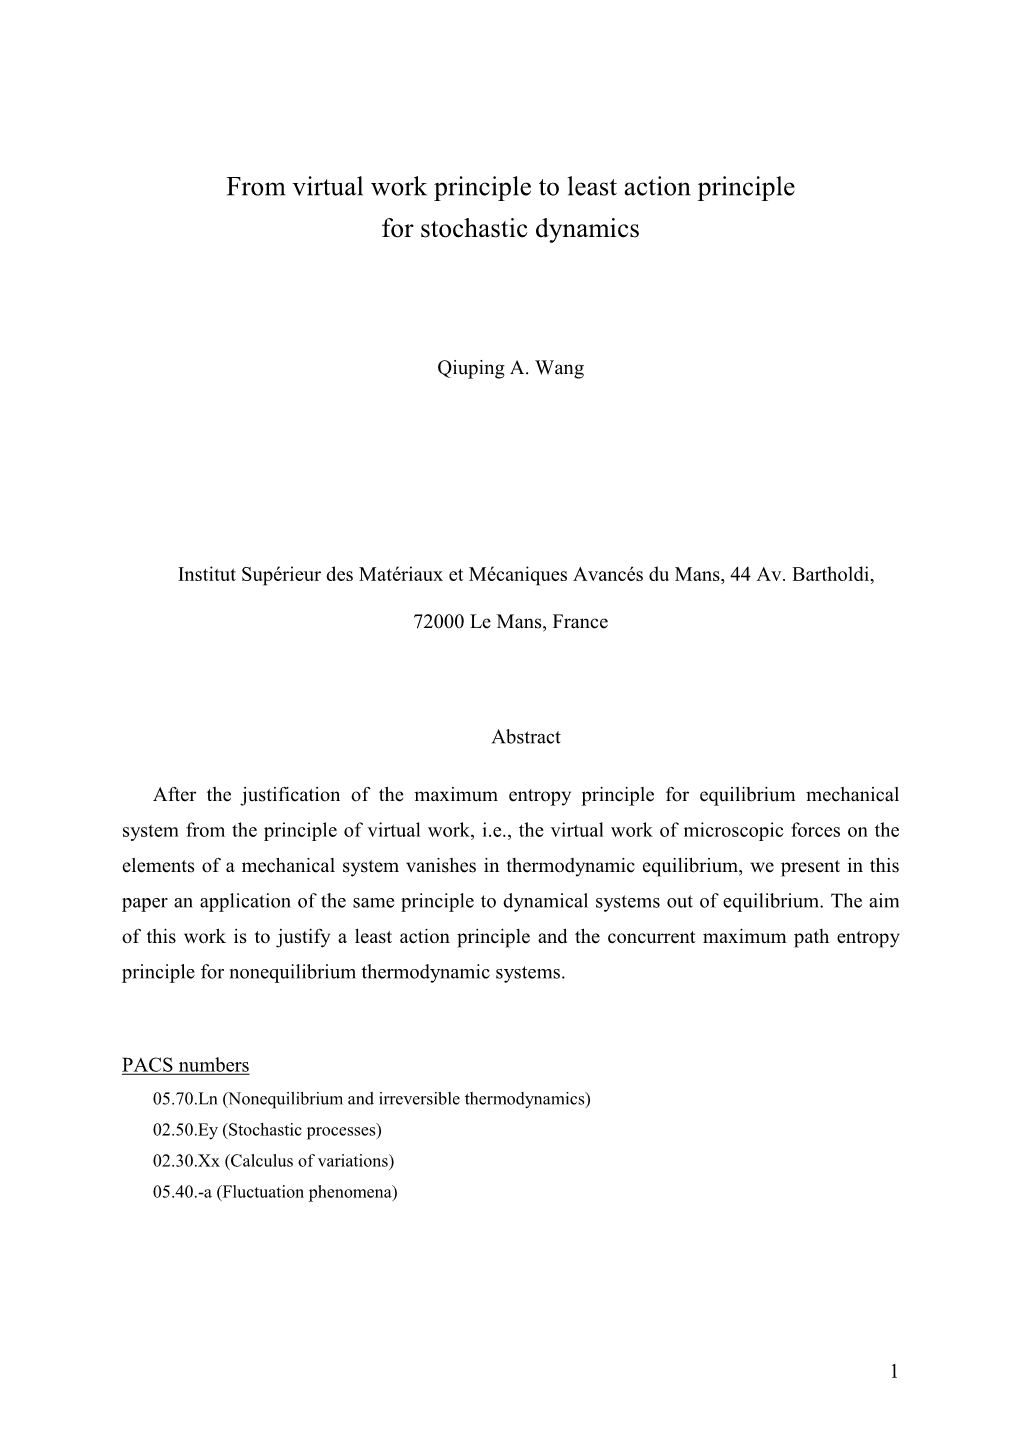 From Virtual Work Principle to Least Action Principle for Stochastic Dynamics